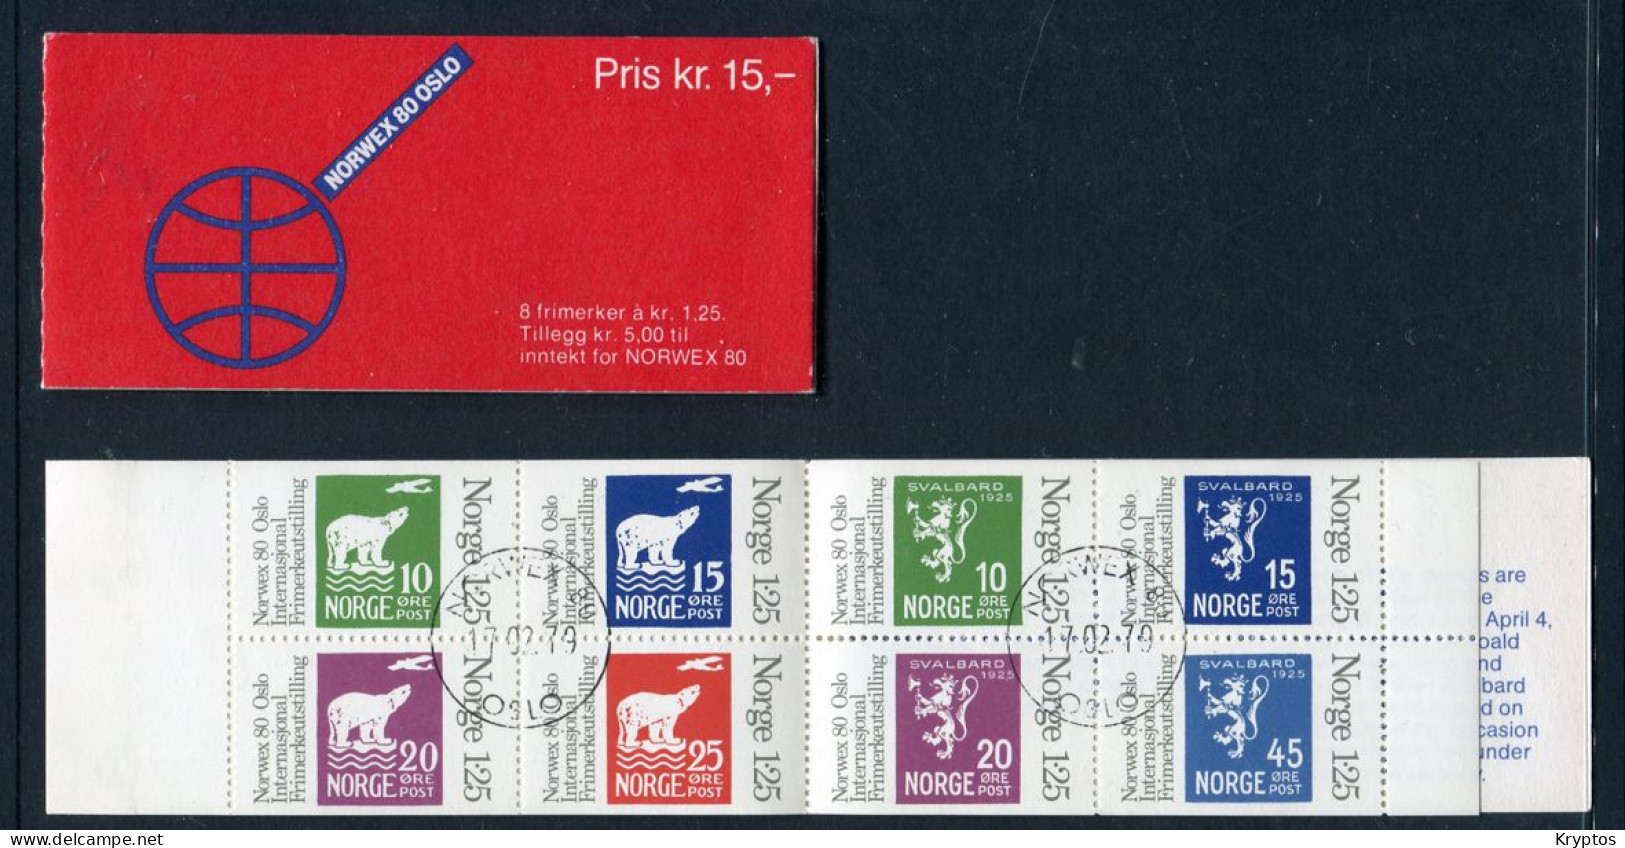 Norway 1979. "Norwex 80 Oslo" Complete Booklet W. Sheet. ALL USED - Used Stamps